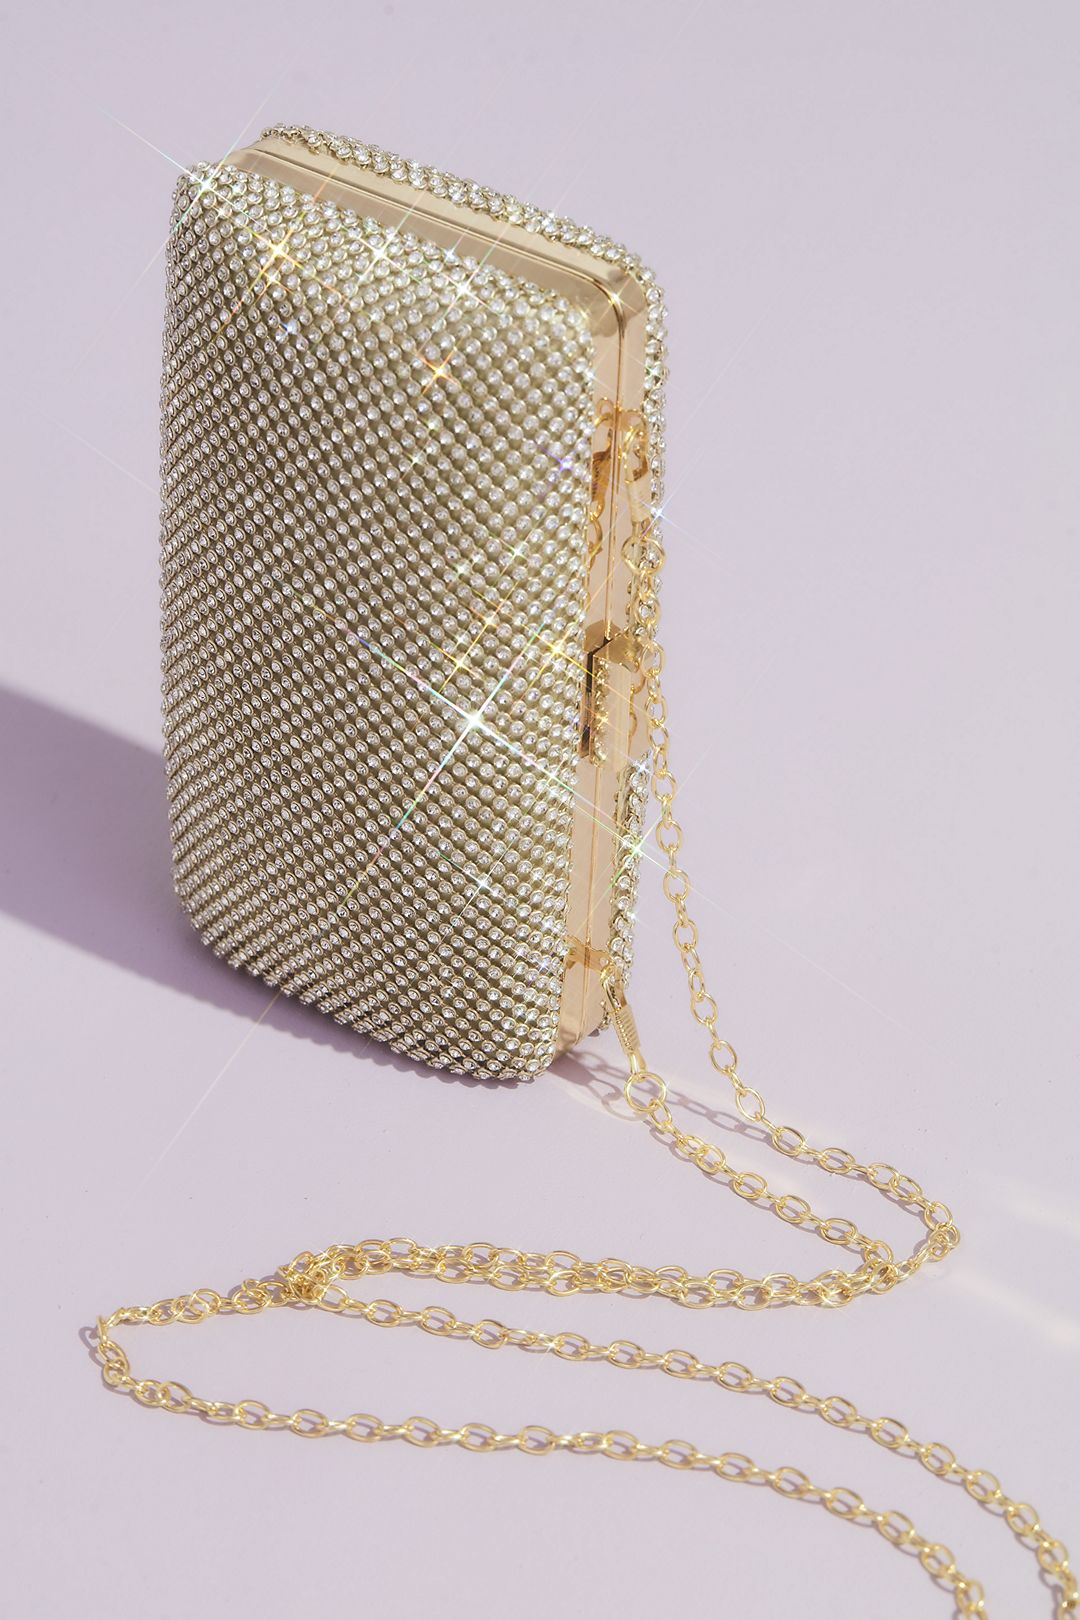 Crystal Minaudiere Evening Clutch with Chain Strap Image 3